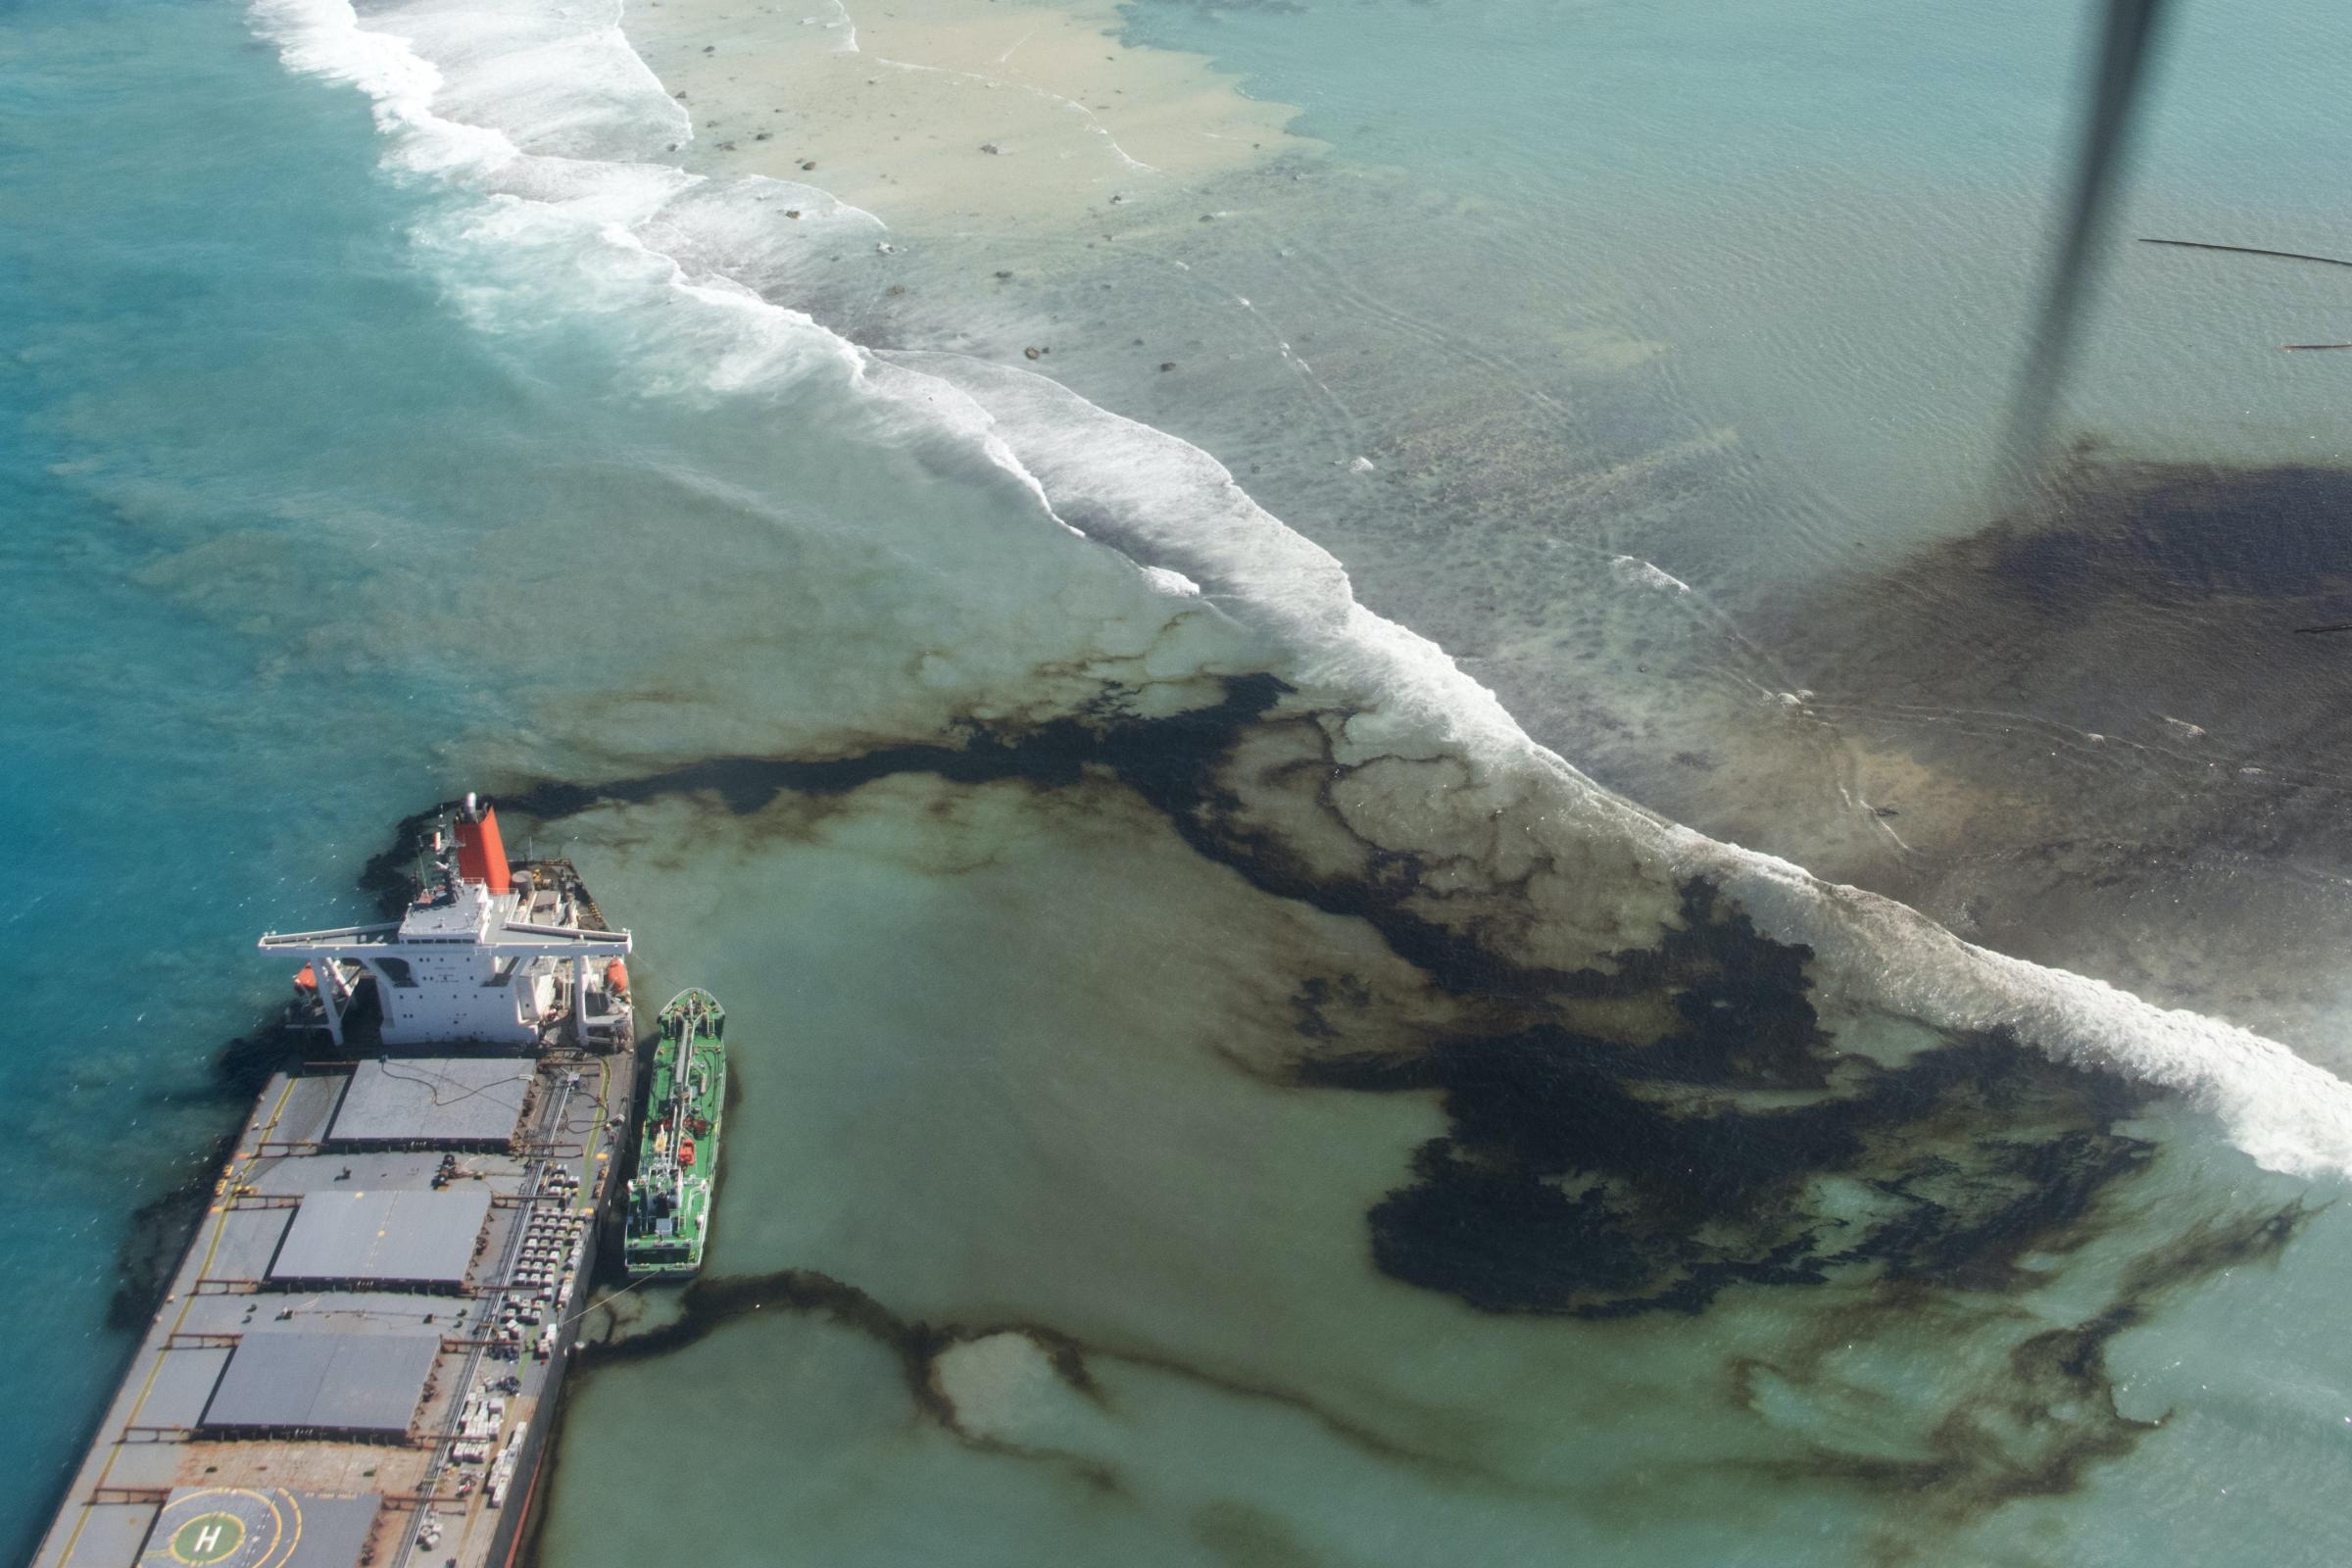 Japan Wants to Pay $ 9 Million to Clean Up Oil Damage in the Mauritius Island